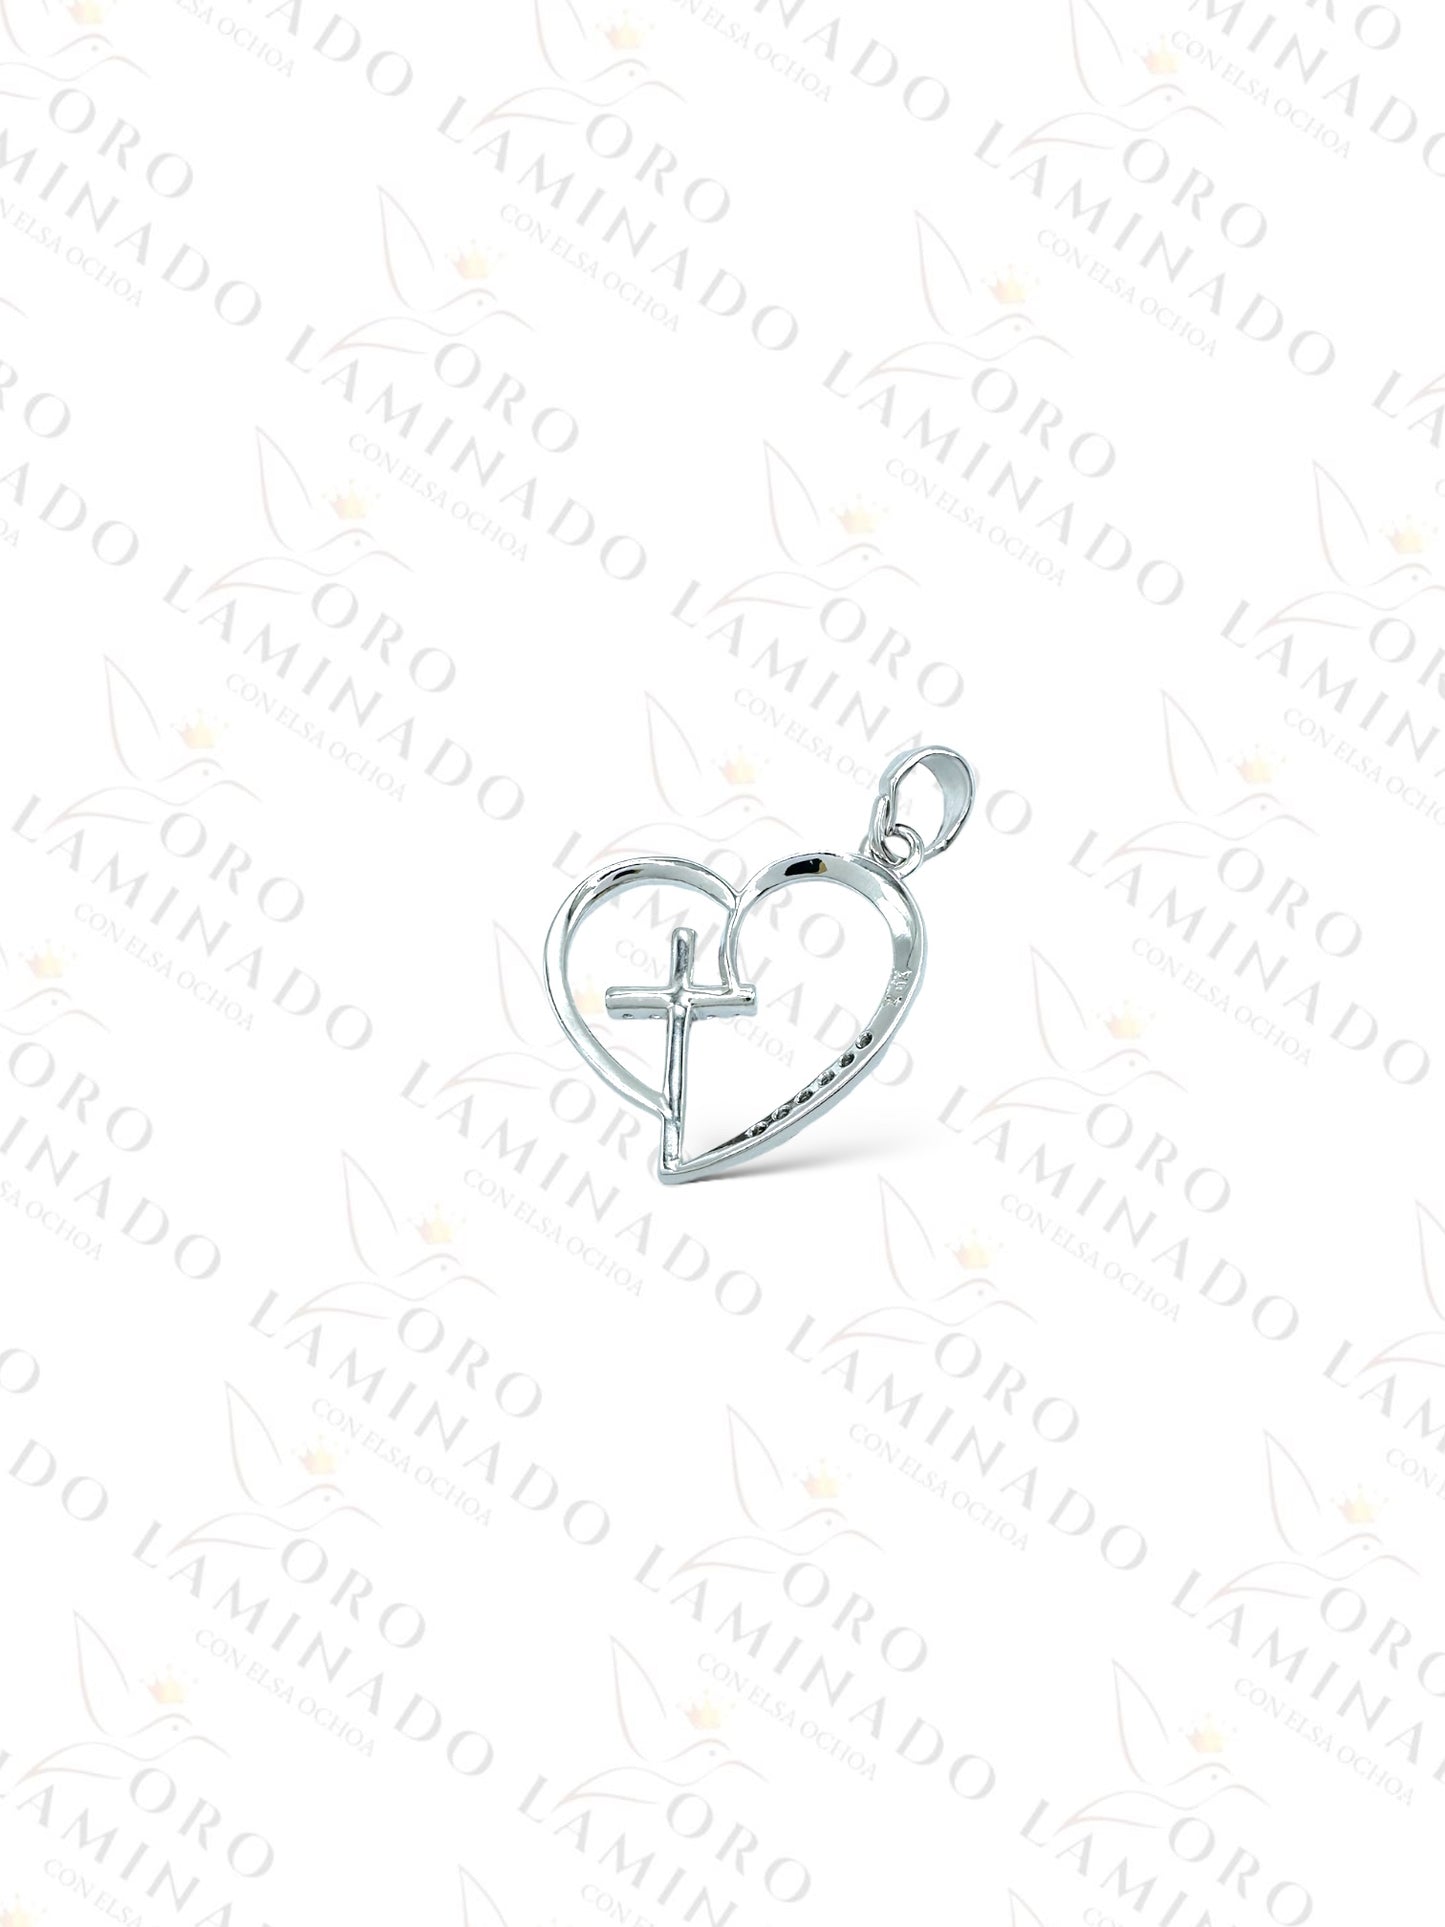 High Quality Silver Heart and Cross Pendant B44